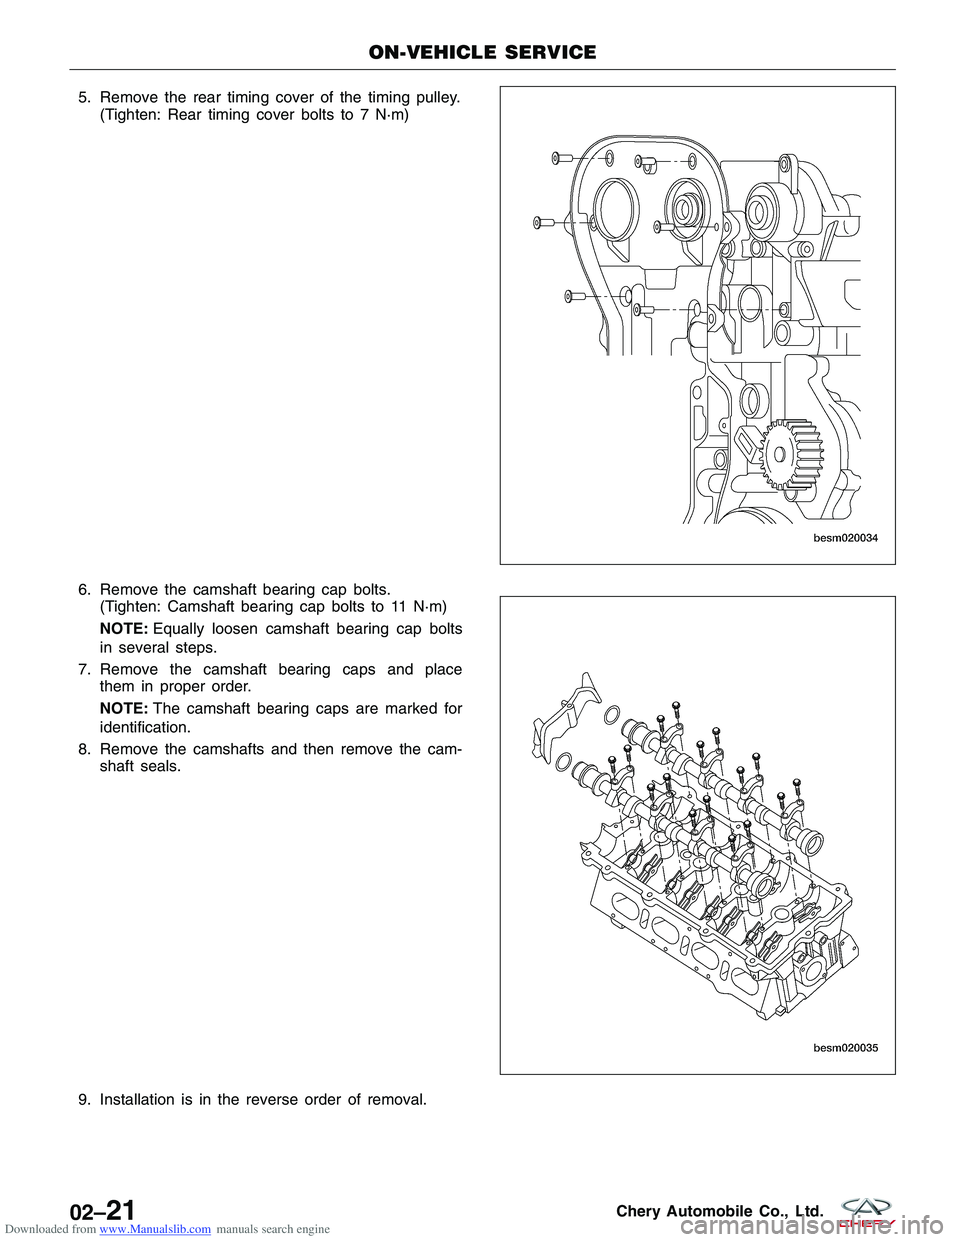 CHERY TIGGO 2009  Service Owners Manual Downloaded from www.Manualslib.com manuals search engine 5. Remove the rear timing cover of the timing pulley.(Tighten: Rear timing cover bolts to 7 N·m)
6. Remove the camshaft bearing cap bolts. (Ti